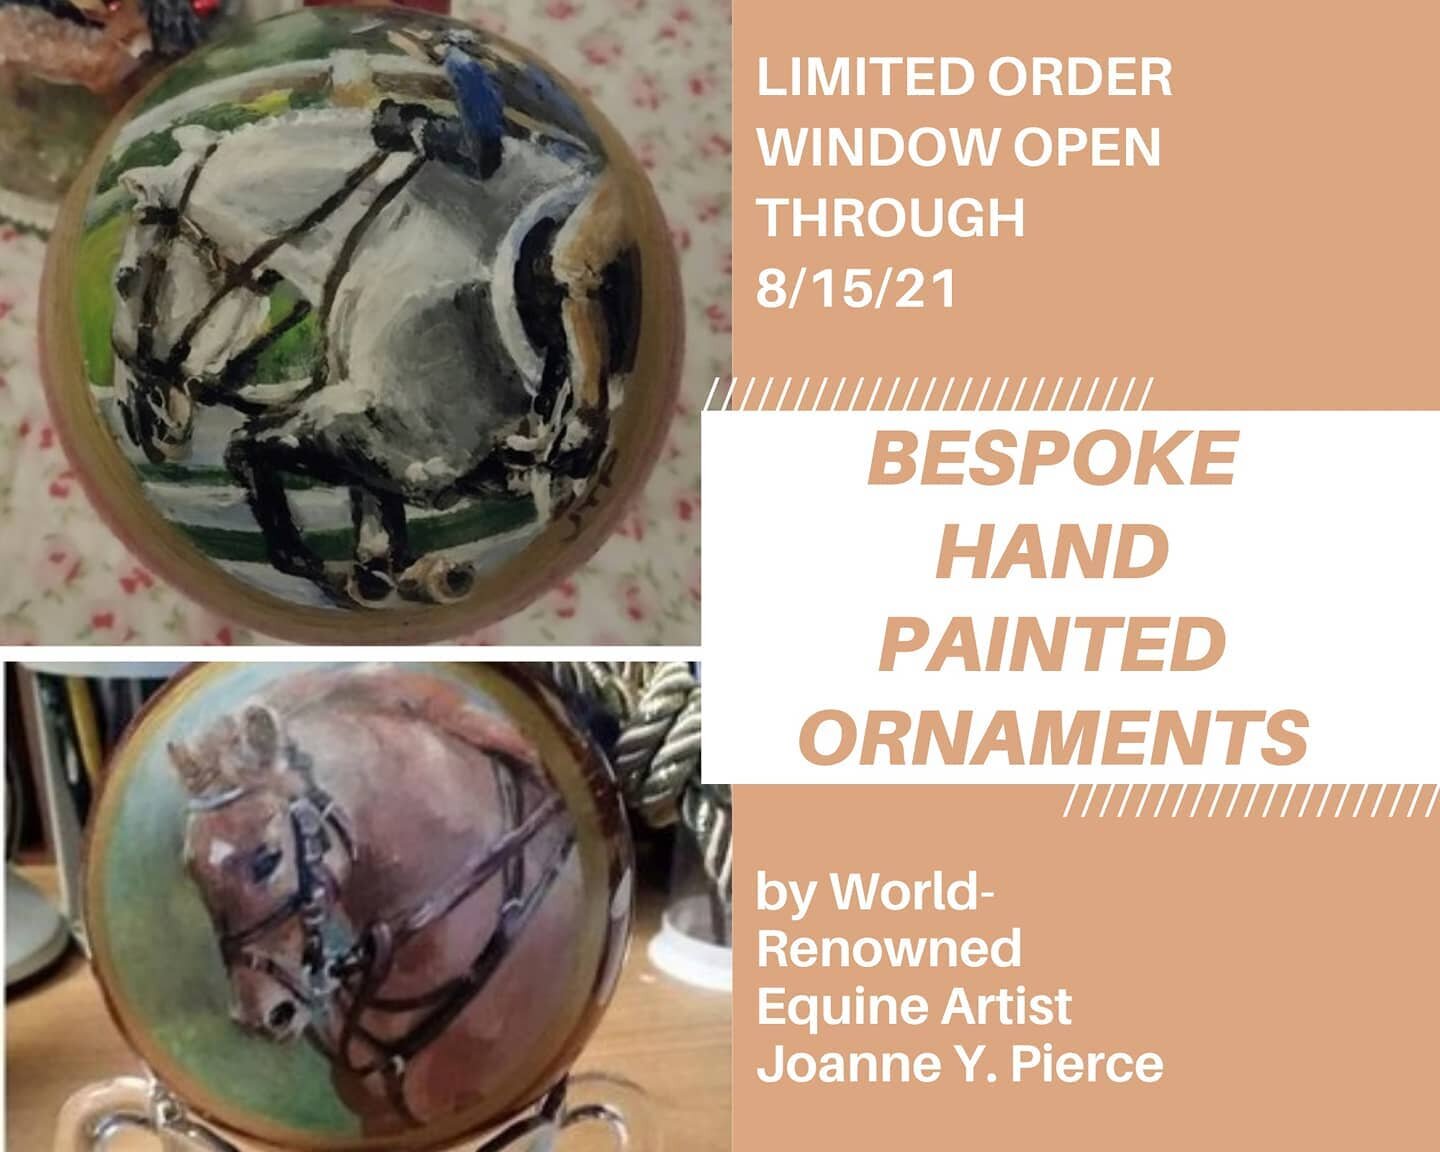 💘 Hello friends and family! I recently had to take a sabbatical from my art and @piercetheheartlessons (more to follow here soon) ... BUT now I am back and opening up a limited order window for my handmade decorative ornaments! Please email me befor